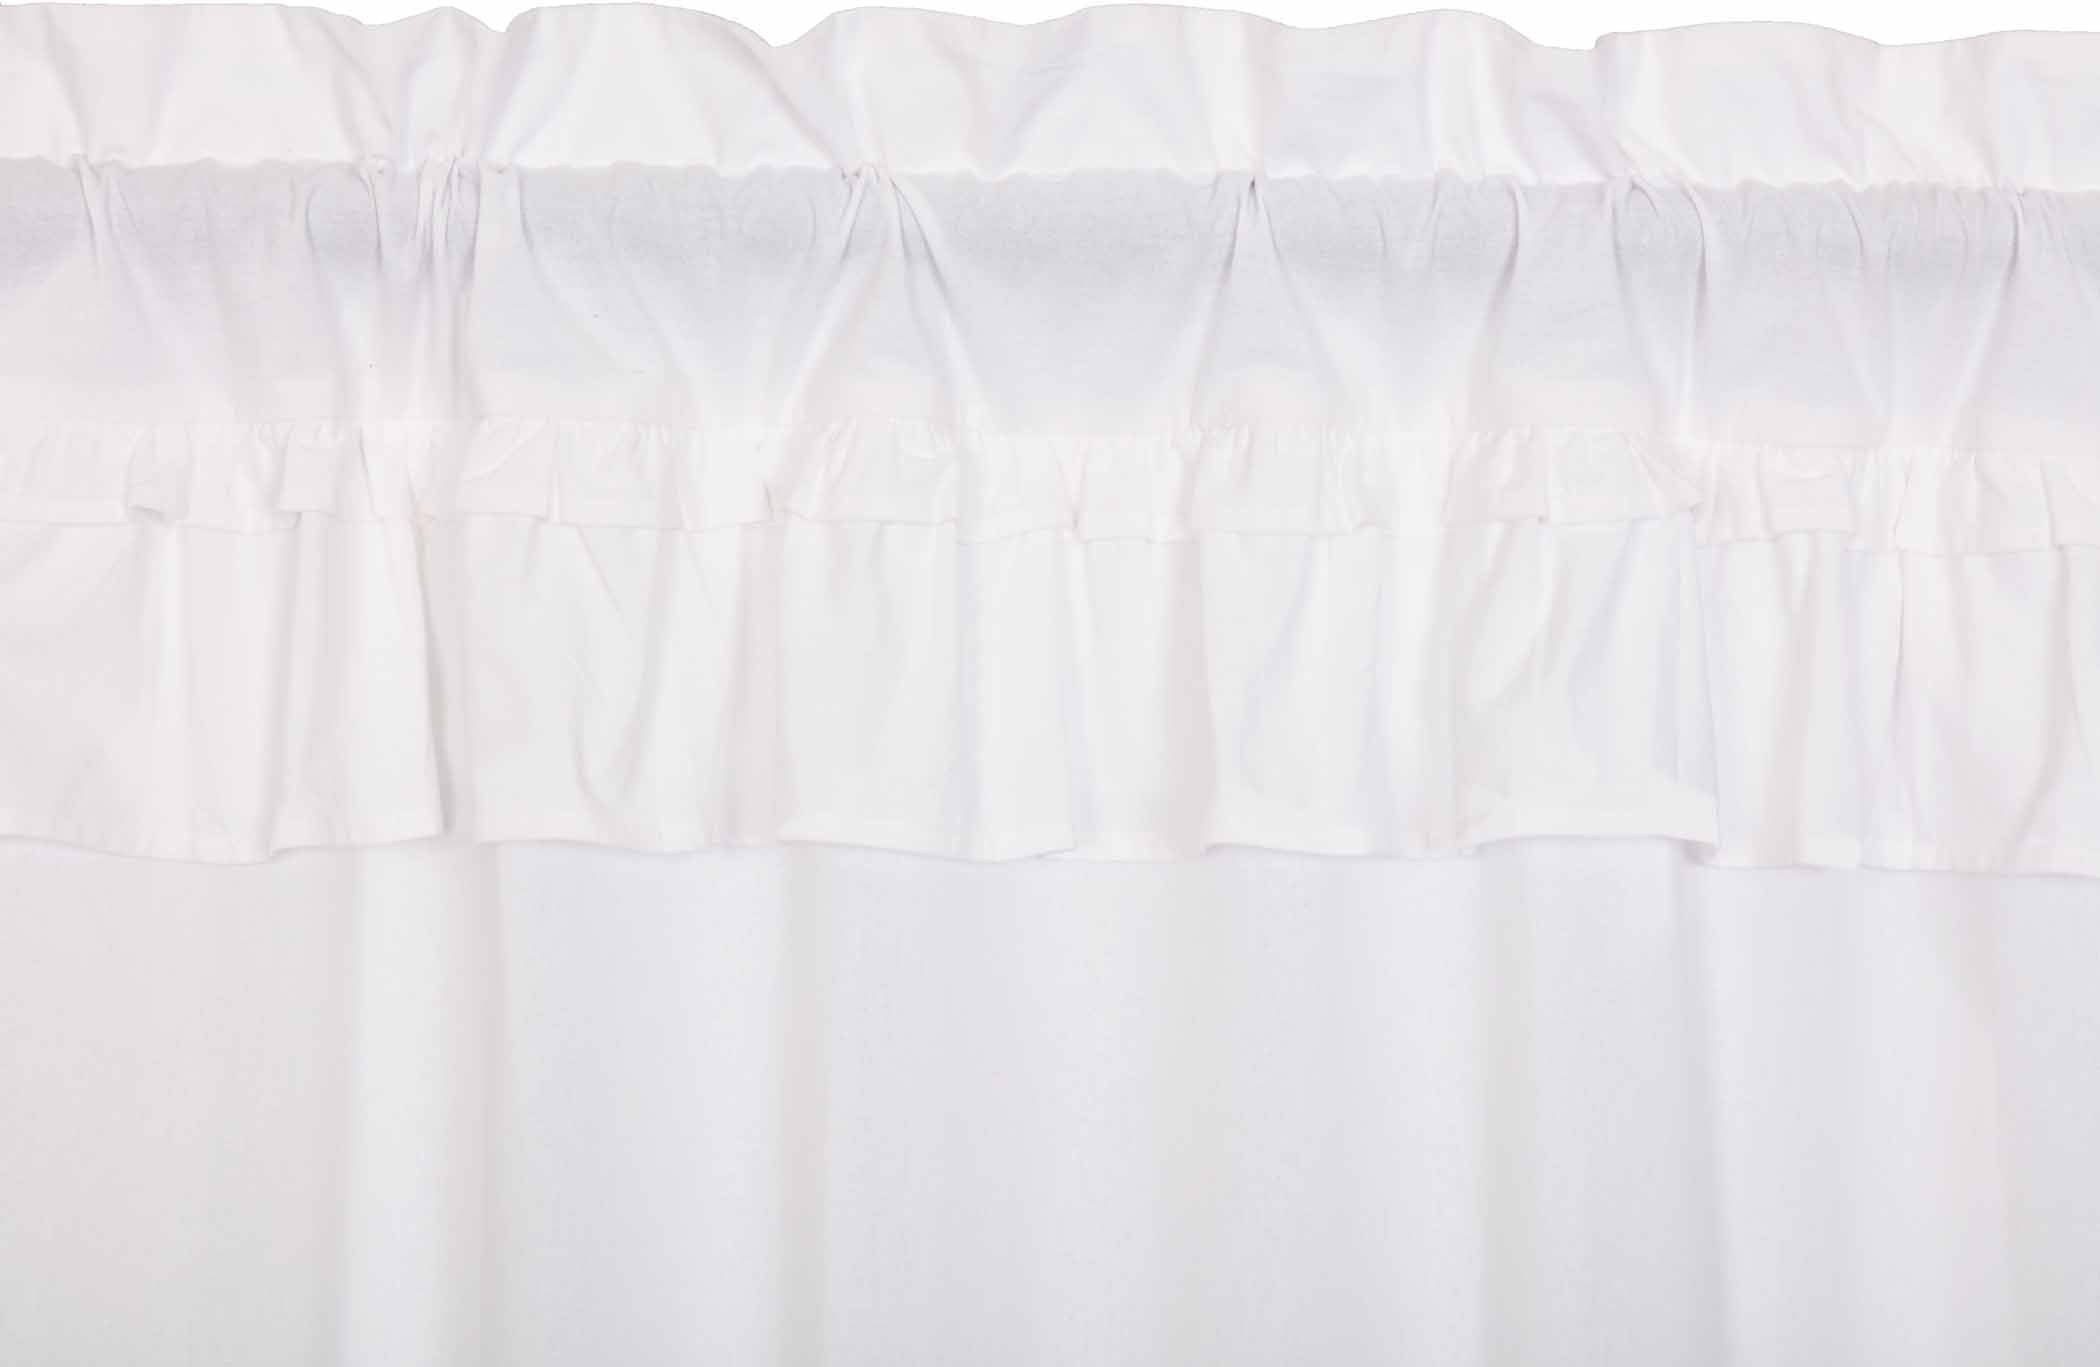 Muslin Ruffled Bleached White Tier Curtain Set of 2 L36xW36 VHC Brands